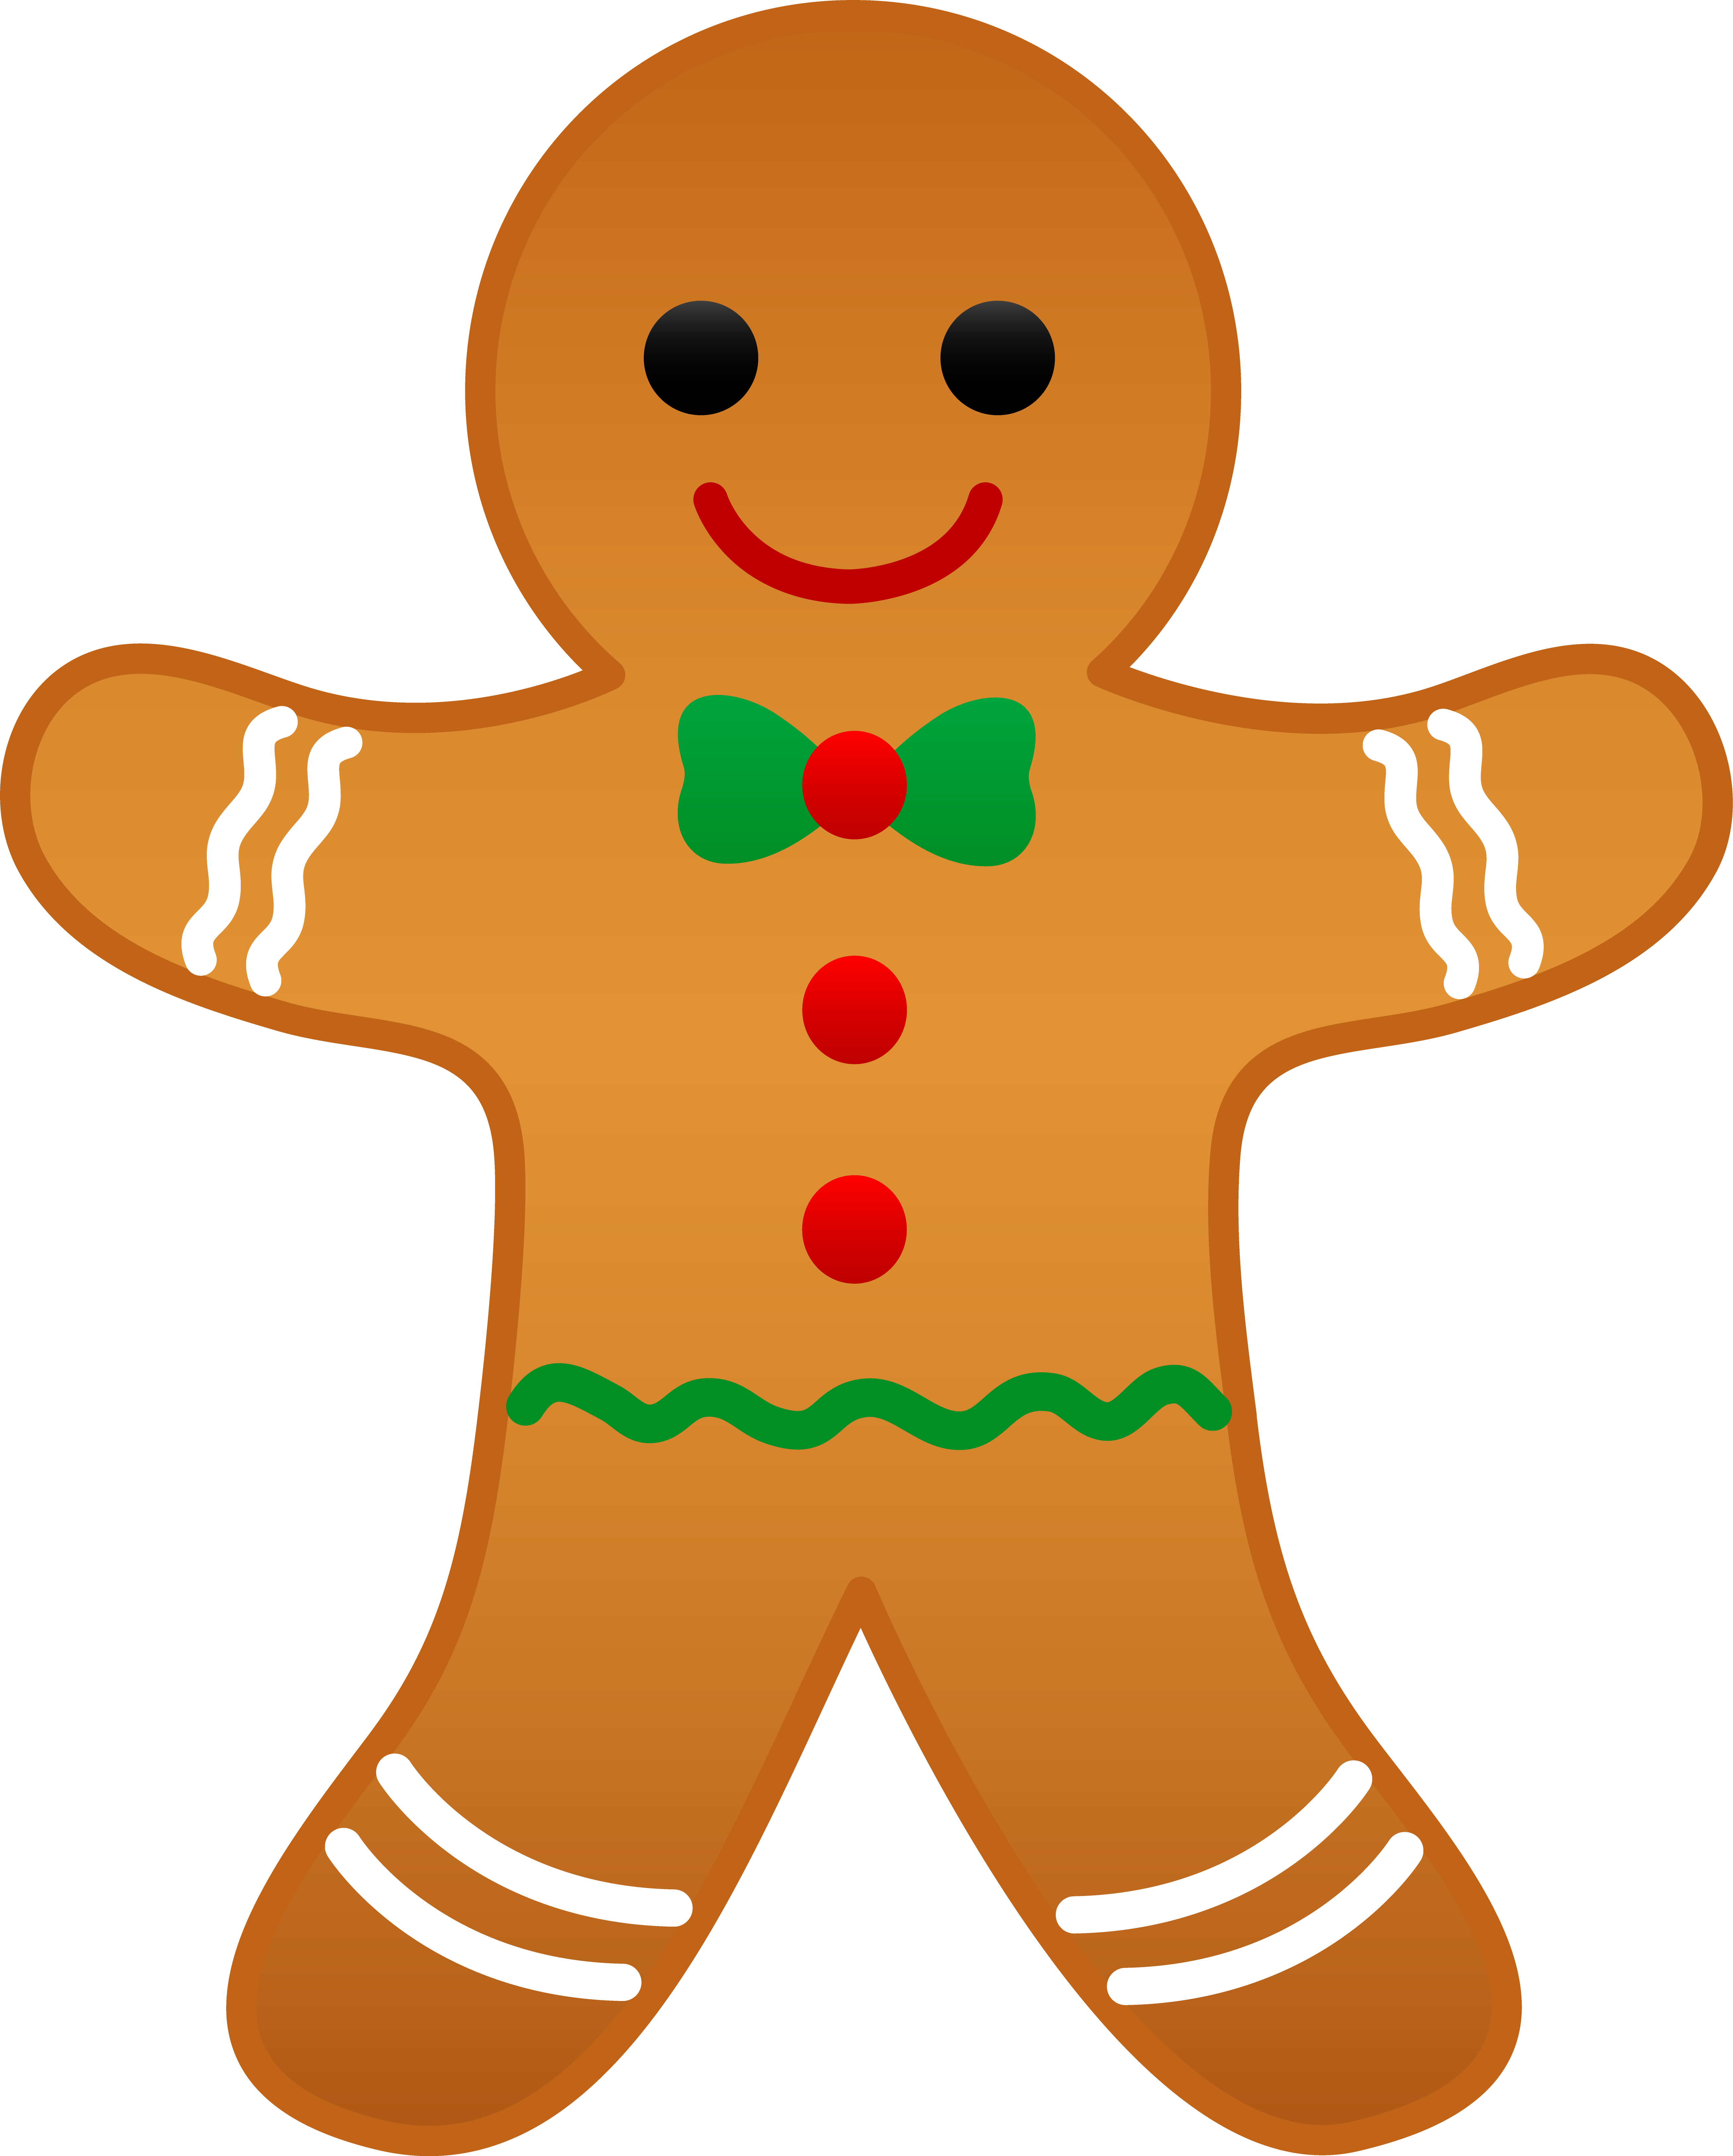 Christmas gingerbread man clip. Responsibility clipart orange person